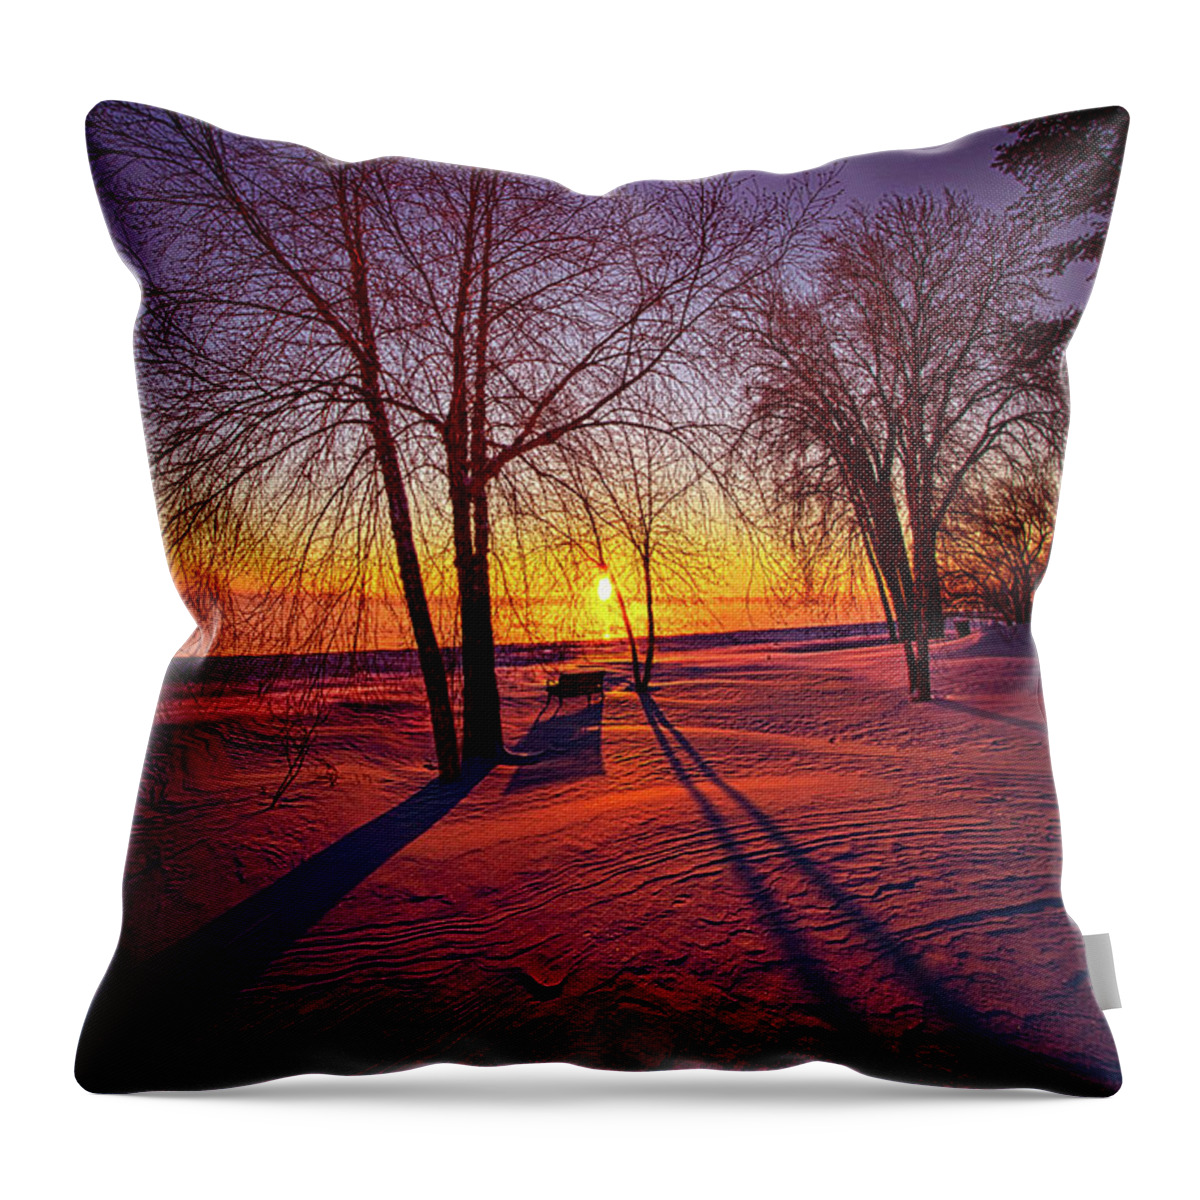 Clouds Throw Pillow featuring the photograph One Day Closer by Phil Koch